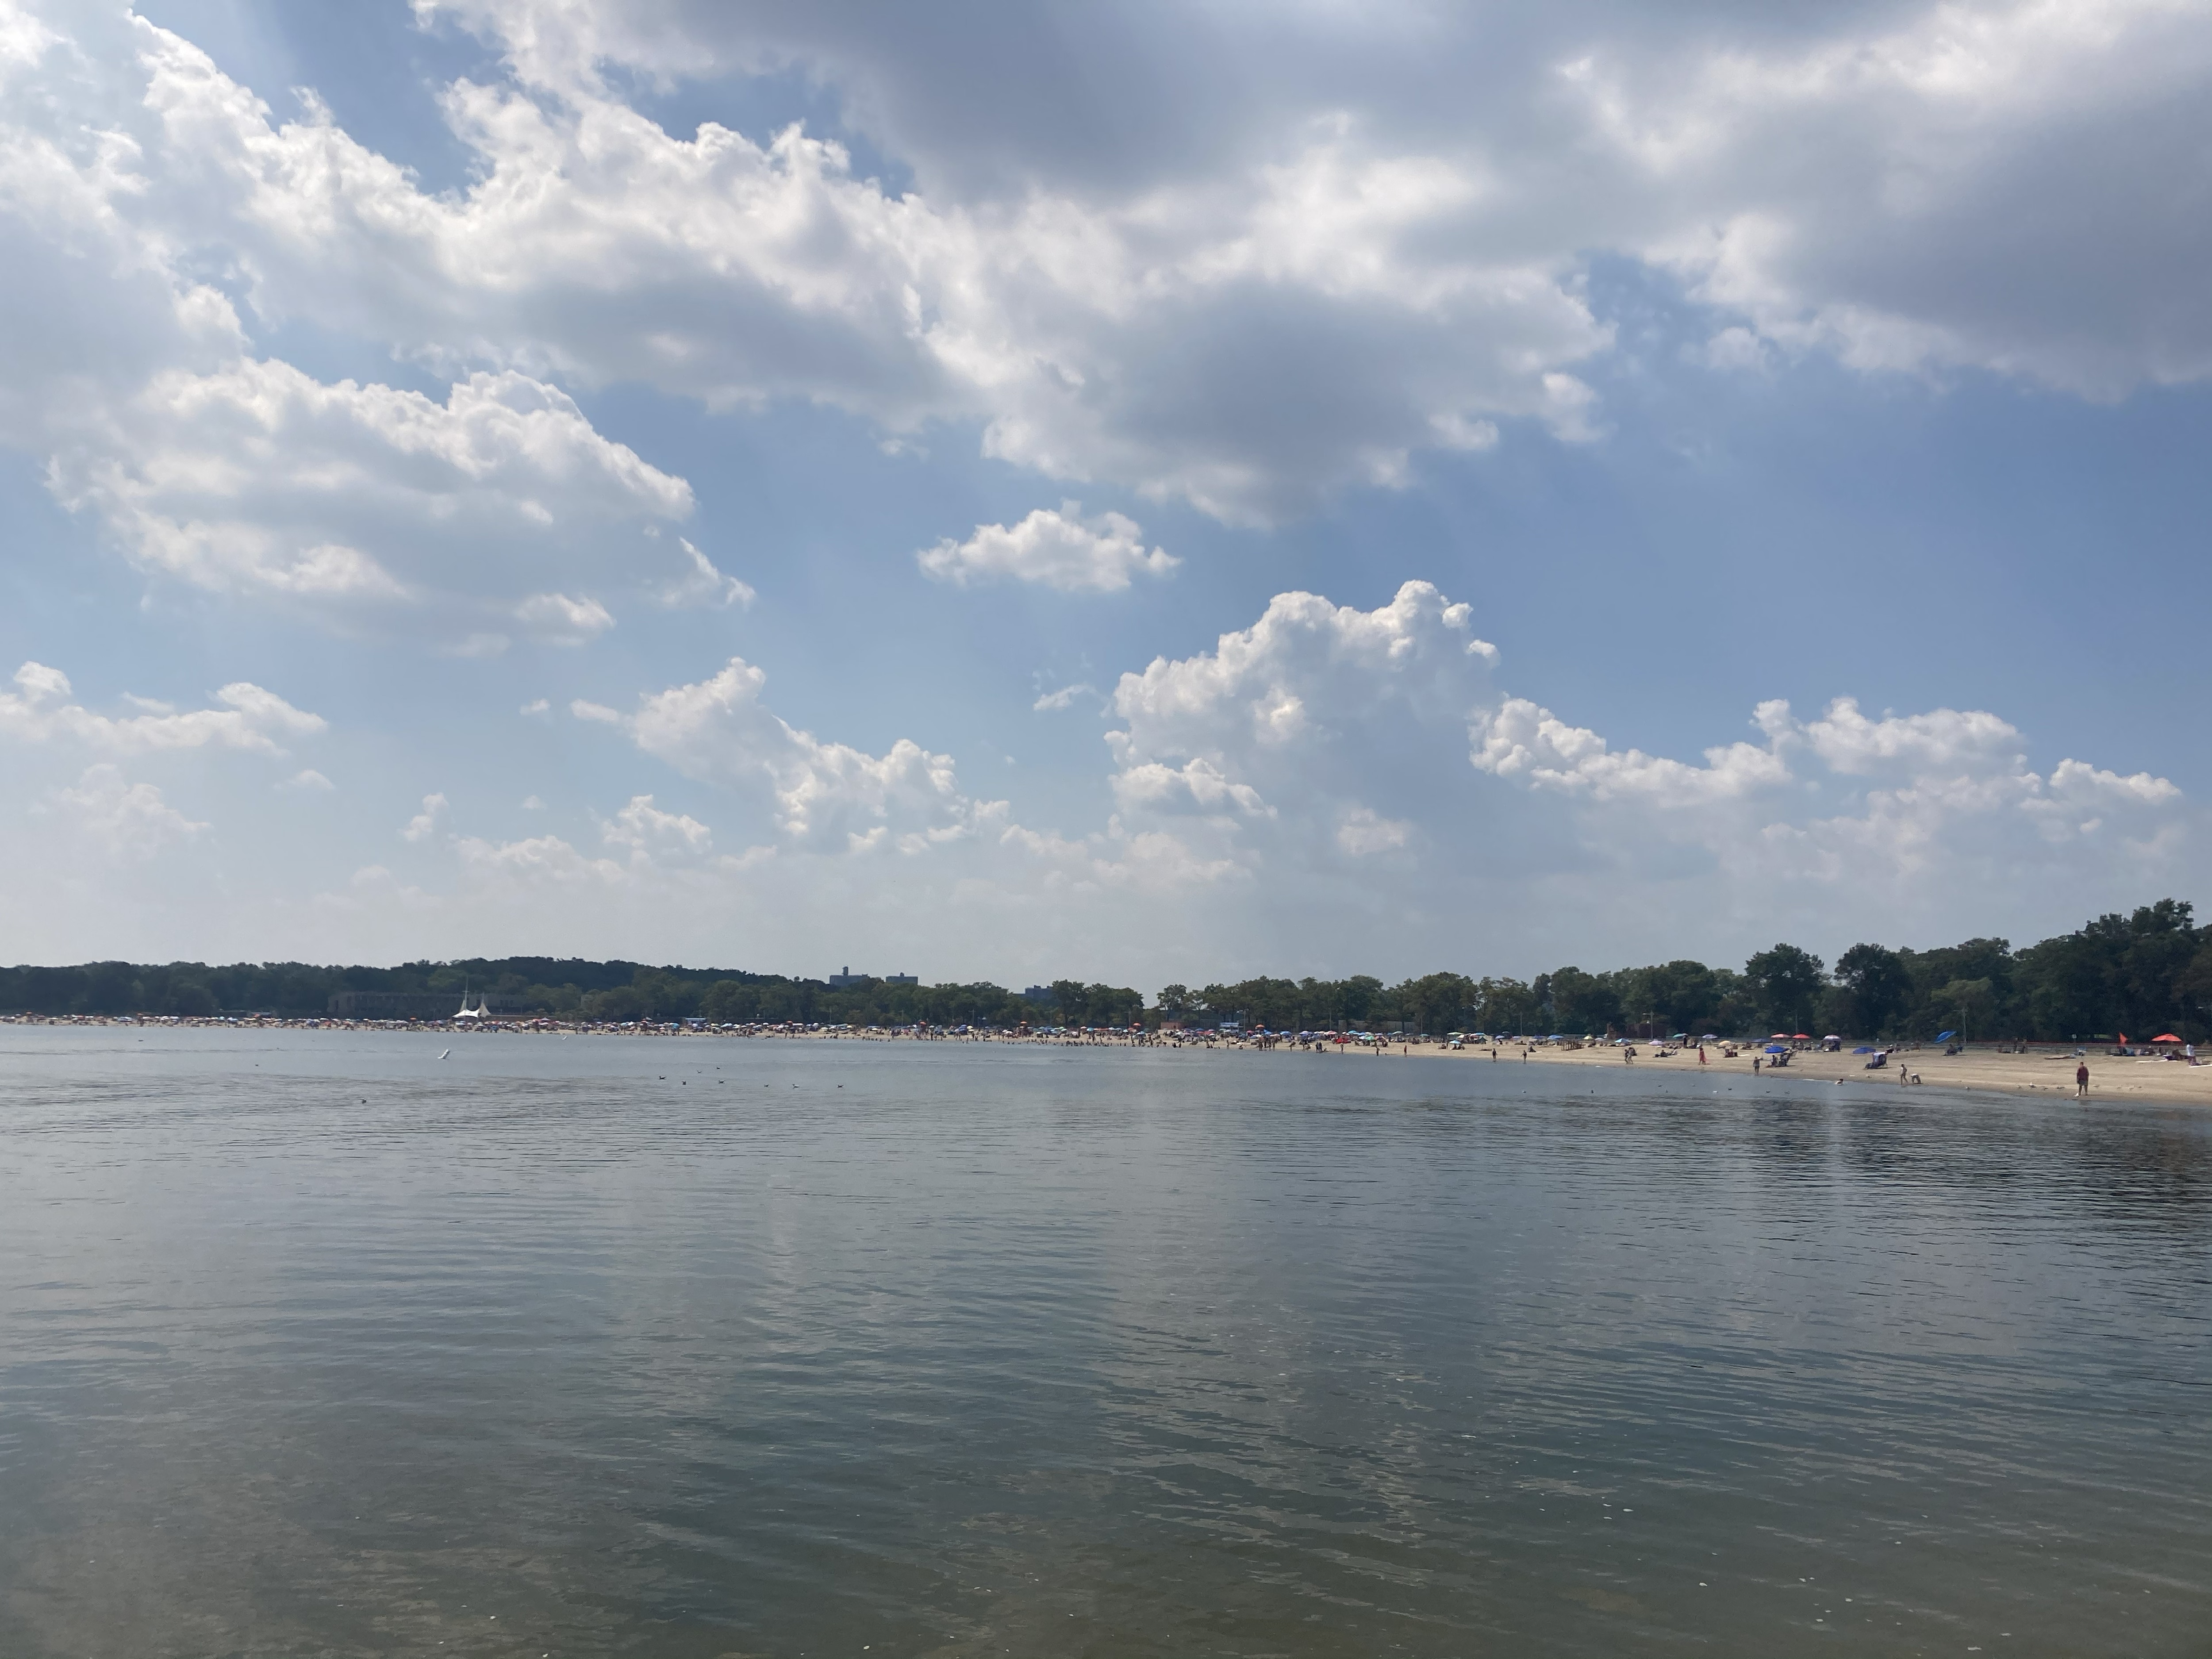 Wide shot of calm water at Orchard Beach, under a bright blue sky with puffy white clouds, and a moderate amount of people on the beach at the right.